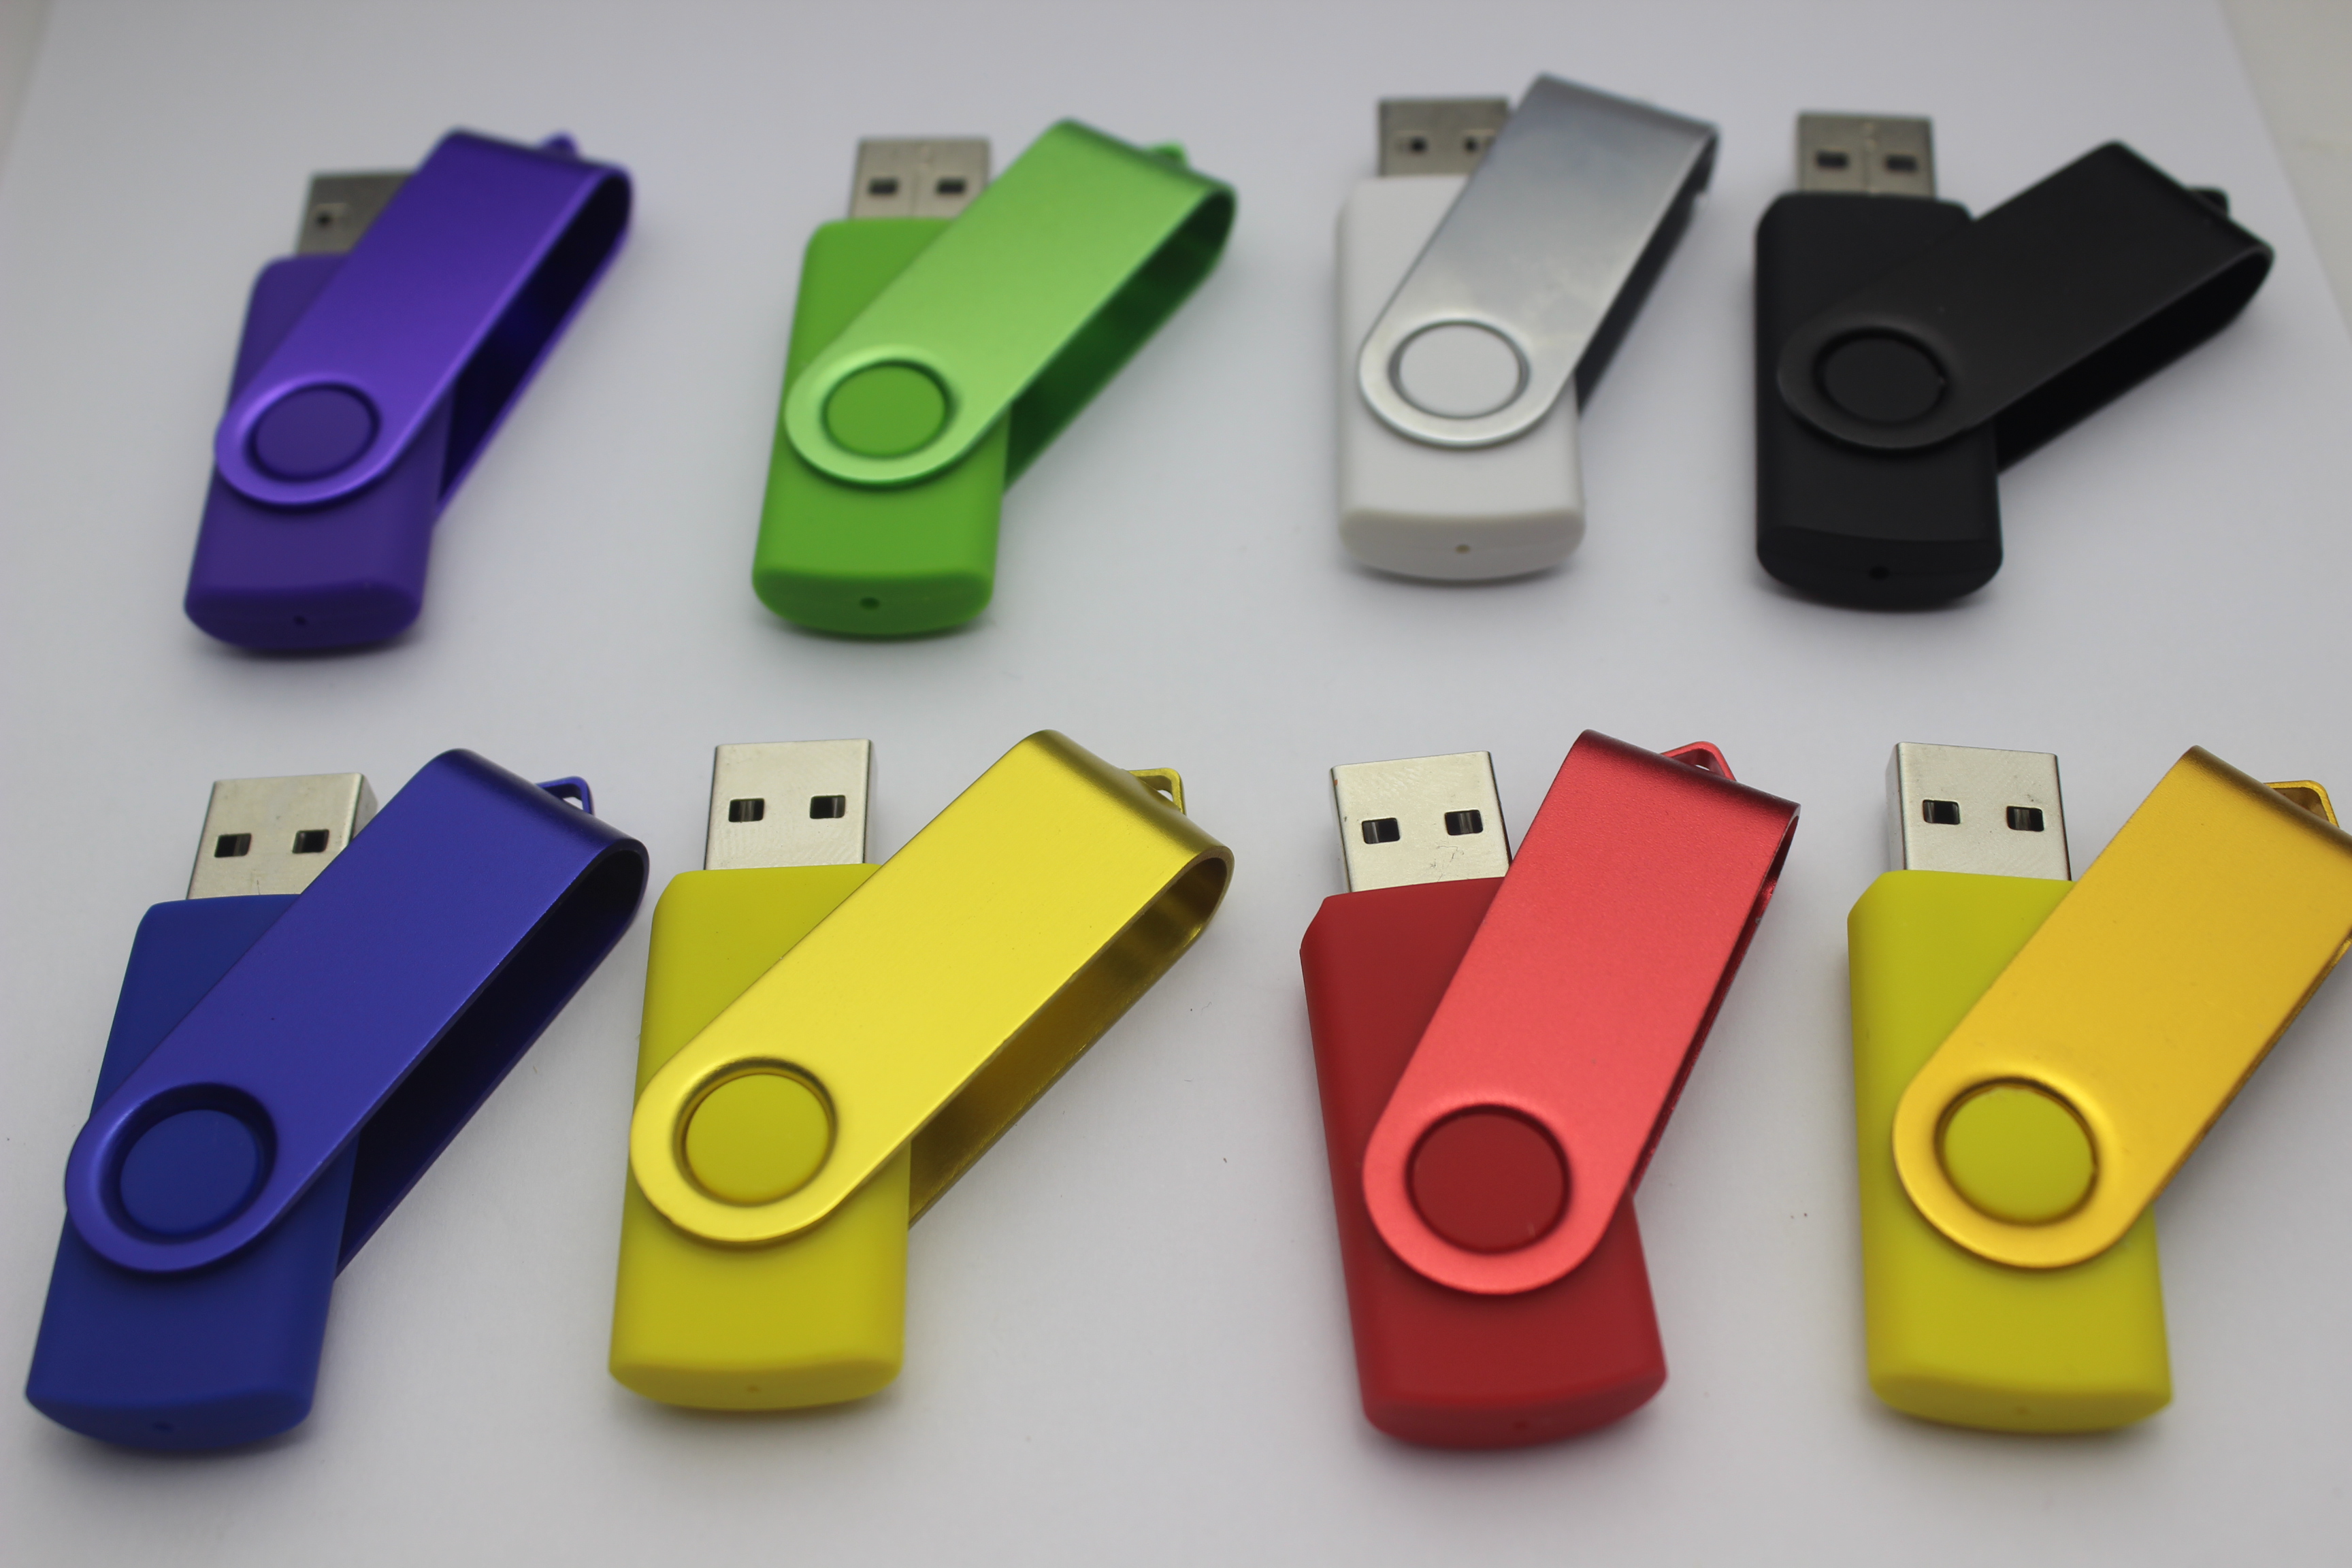 

2019 hot Promotion pendrive 64GB 128GB 256GB MIX for USB Flash Drive gift U Disk rotational style memory stick with Fedex